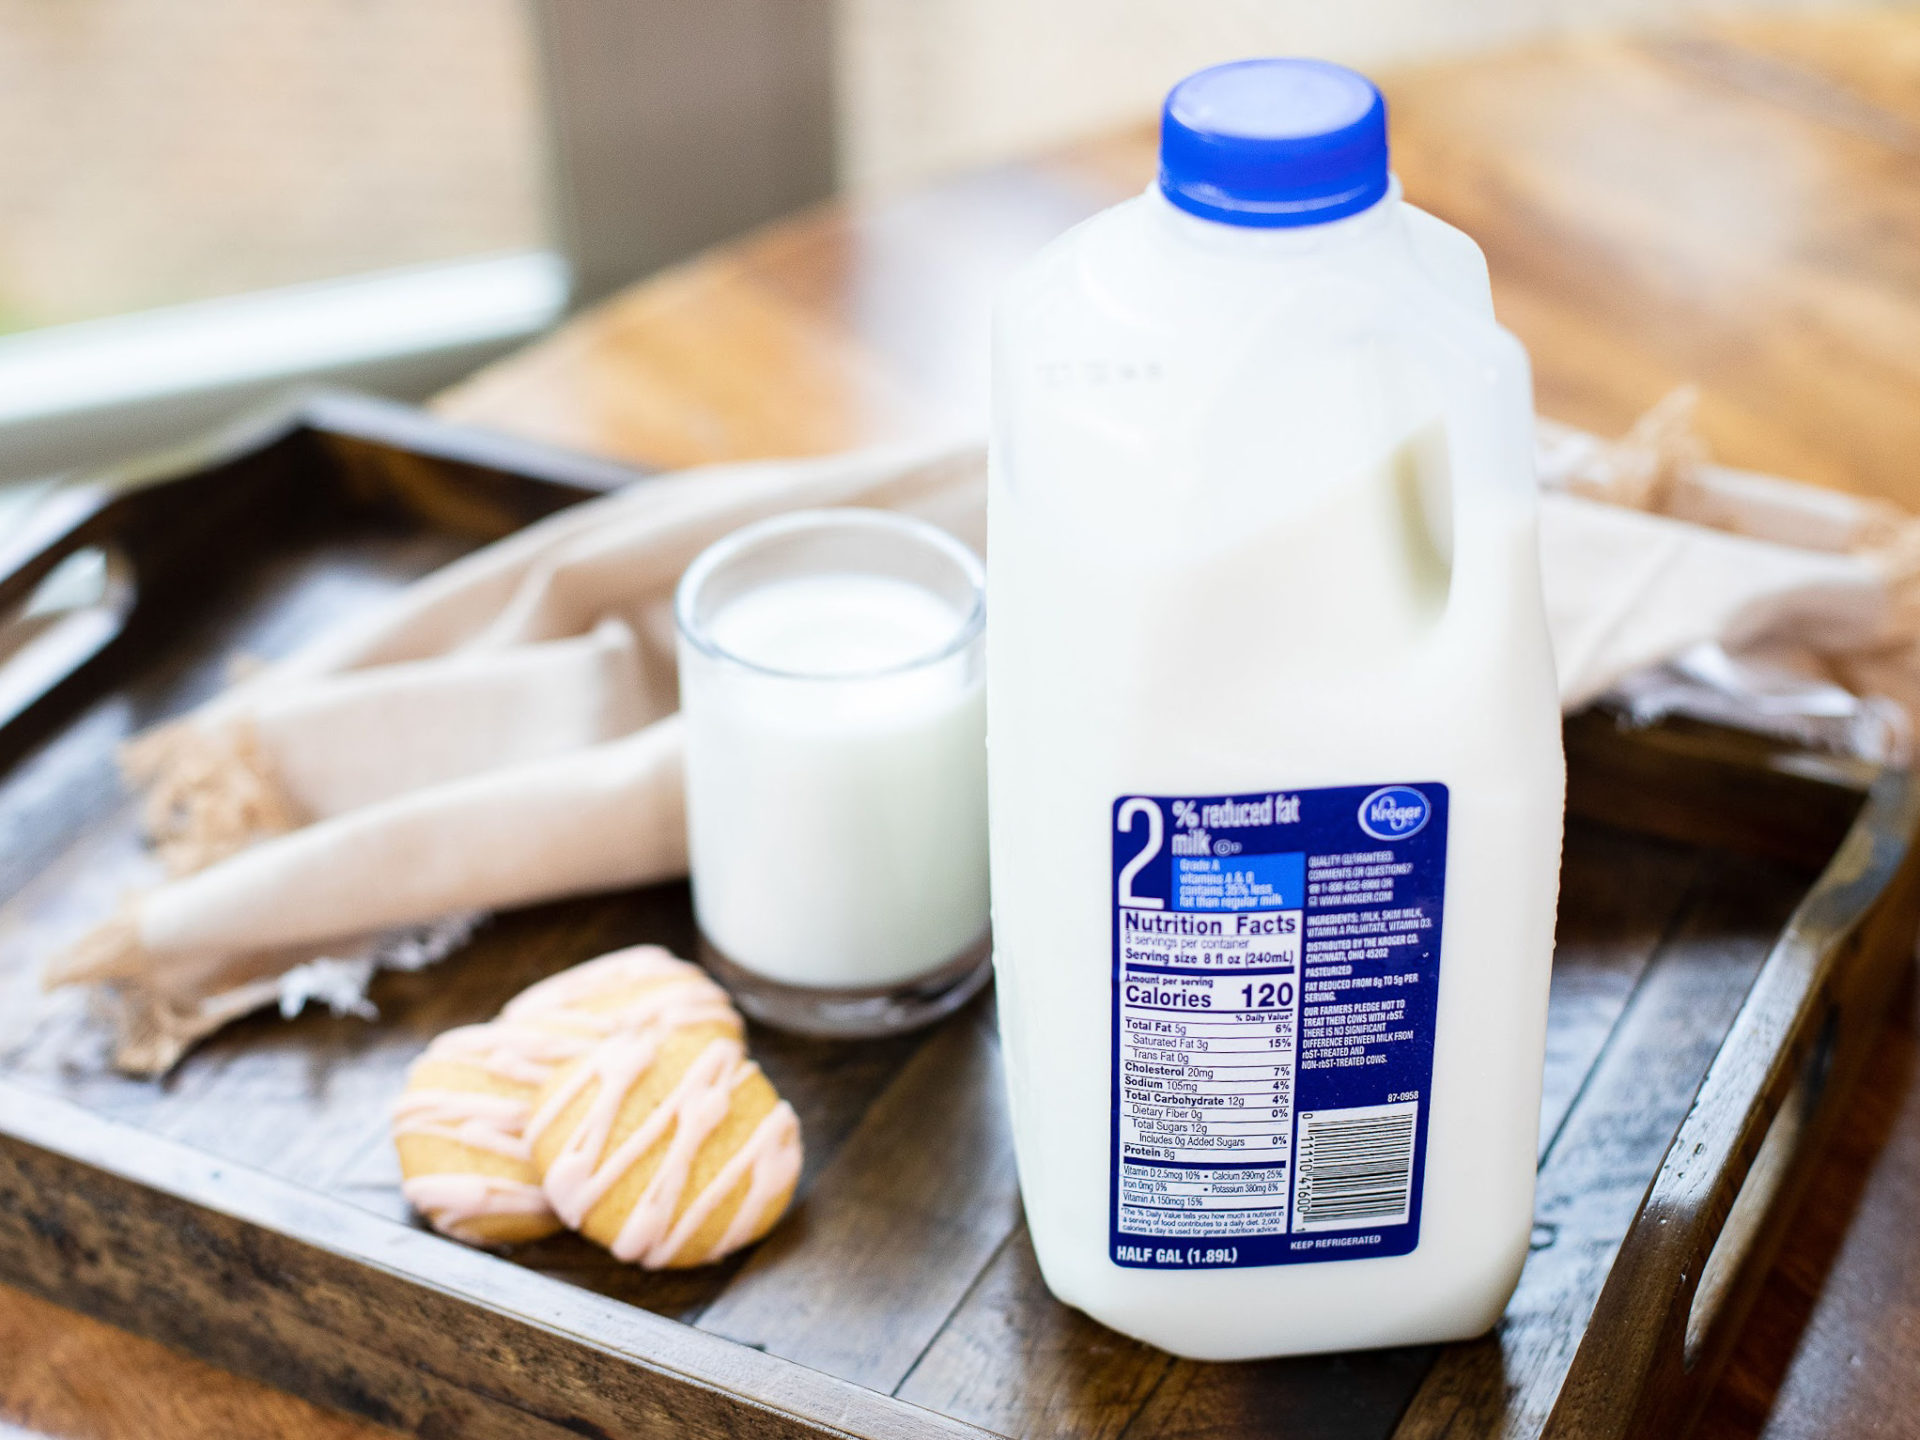 Half Gallons Of Kroger Milk Are Just 99¢ Each